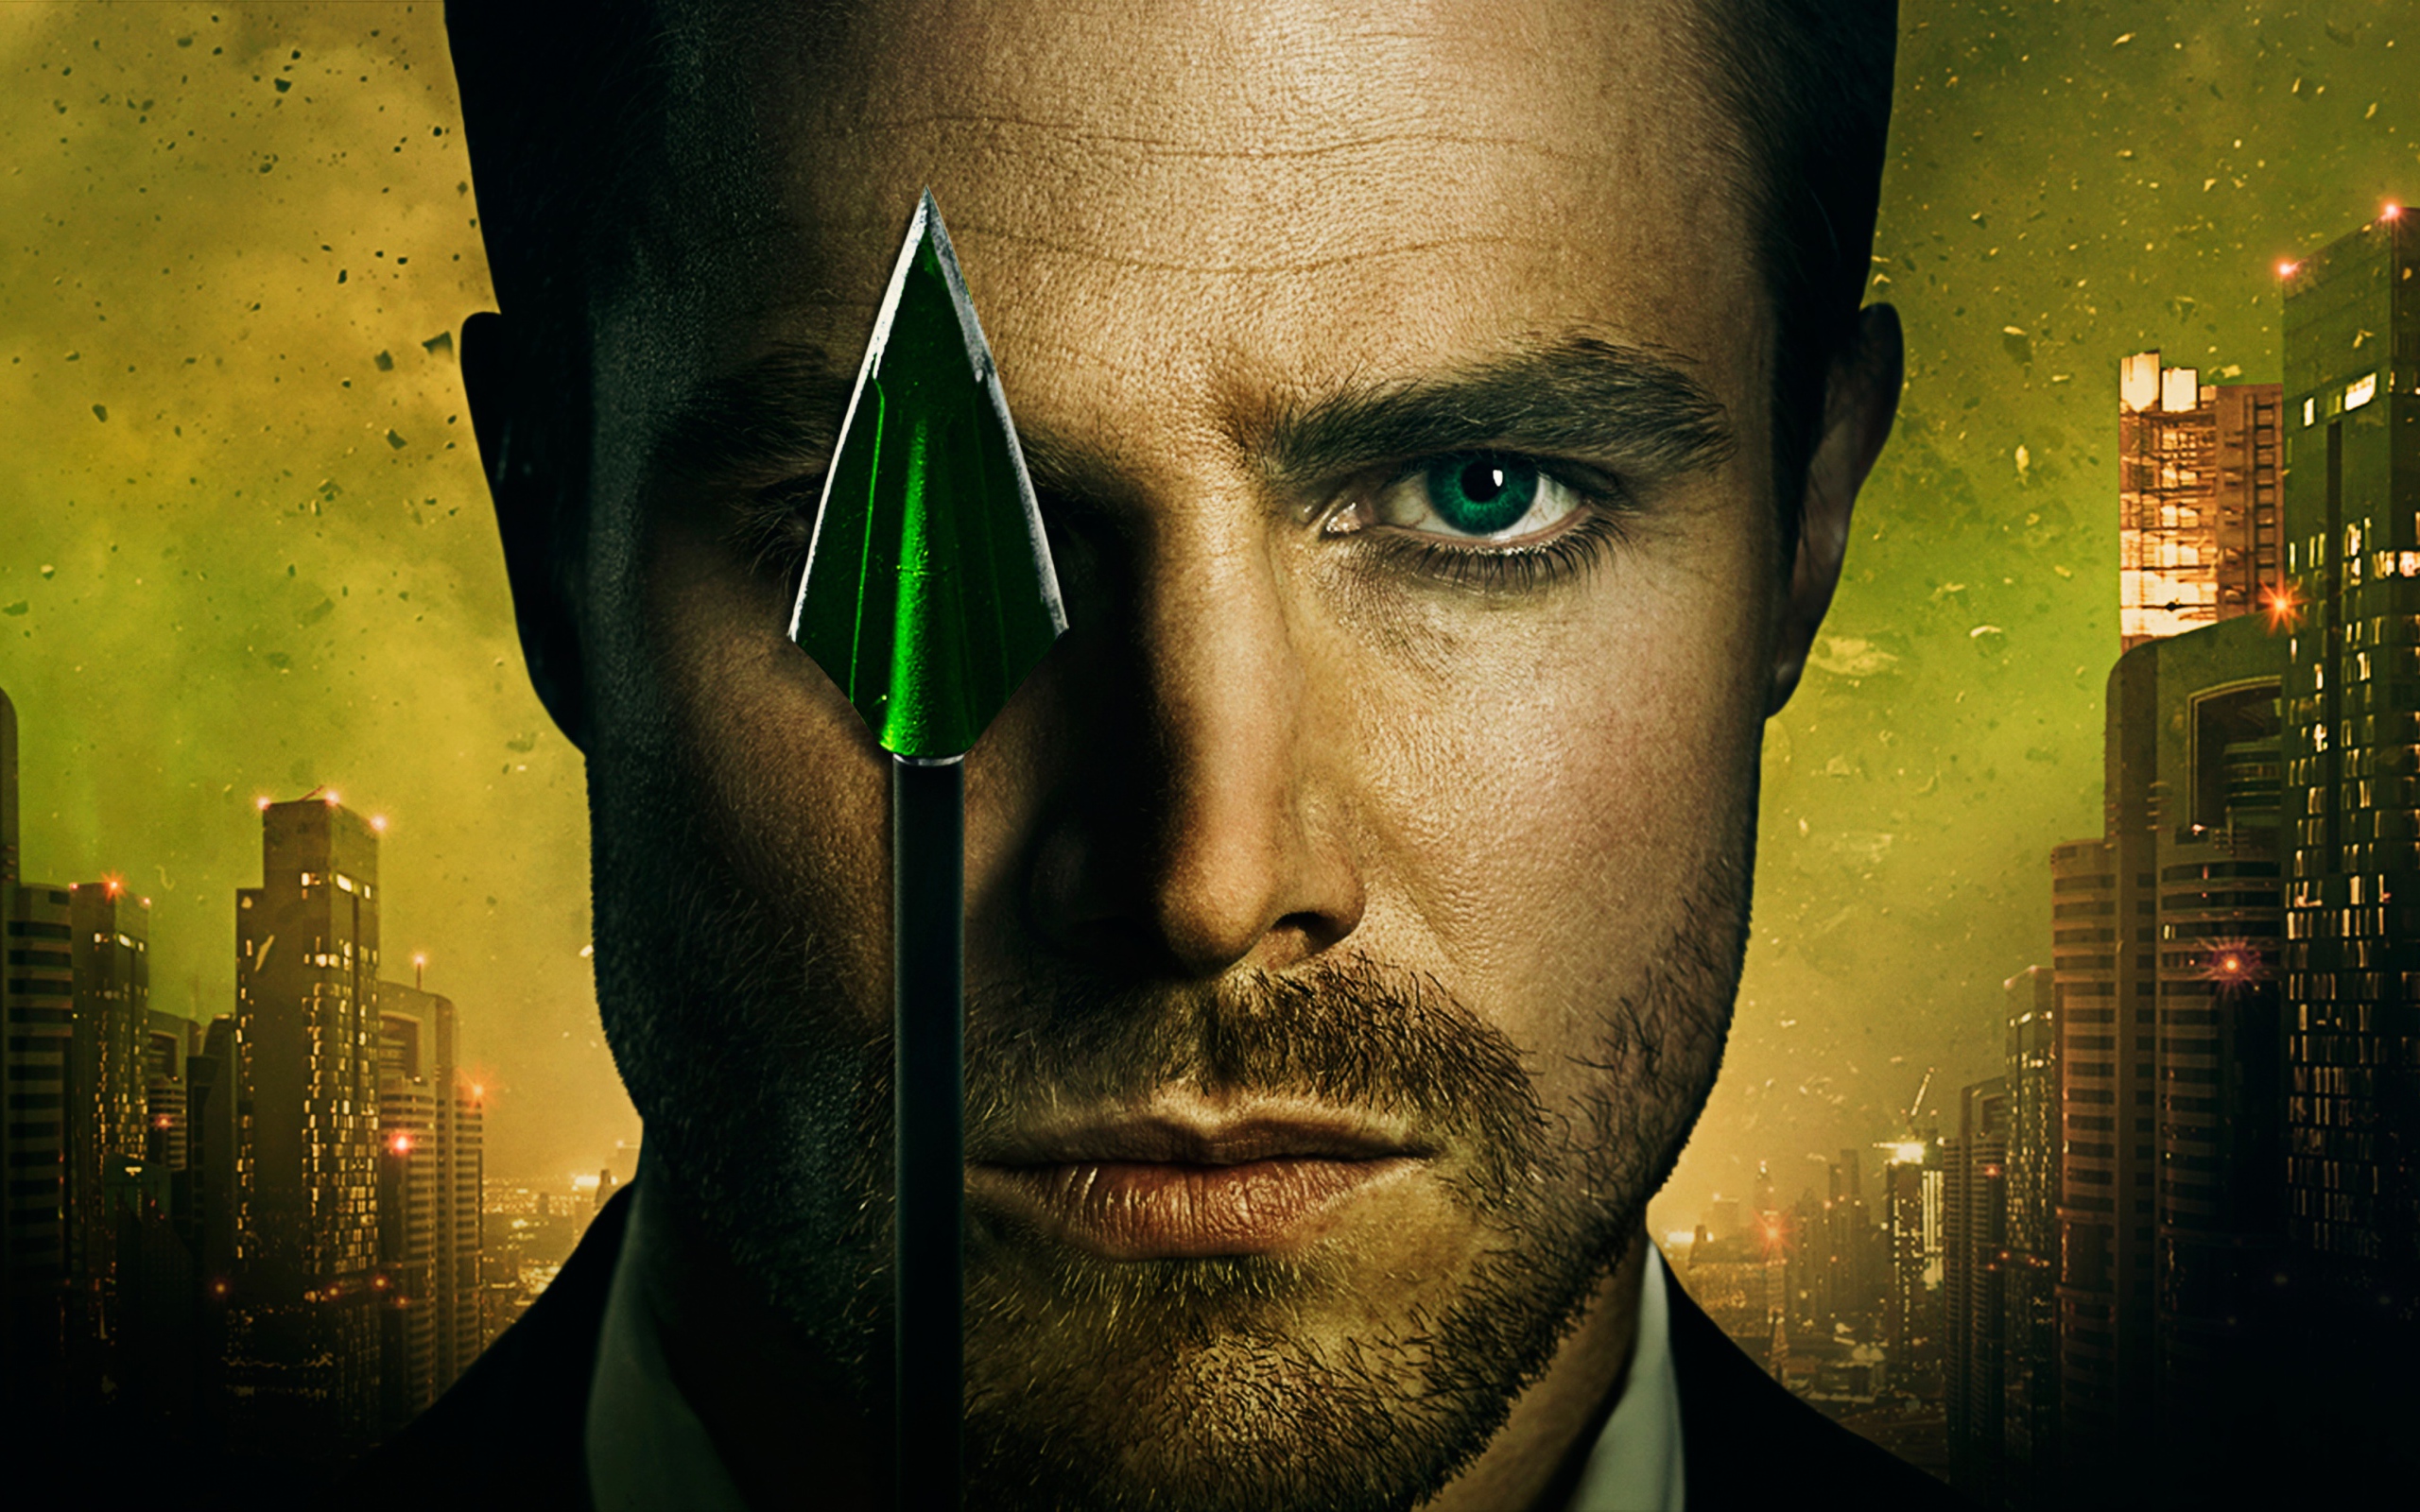 Actor Stephen Amell in the series Green Arrow 6 season